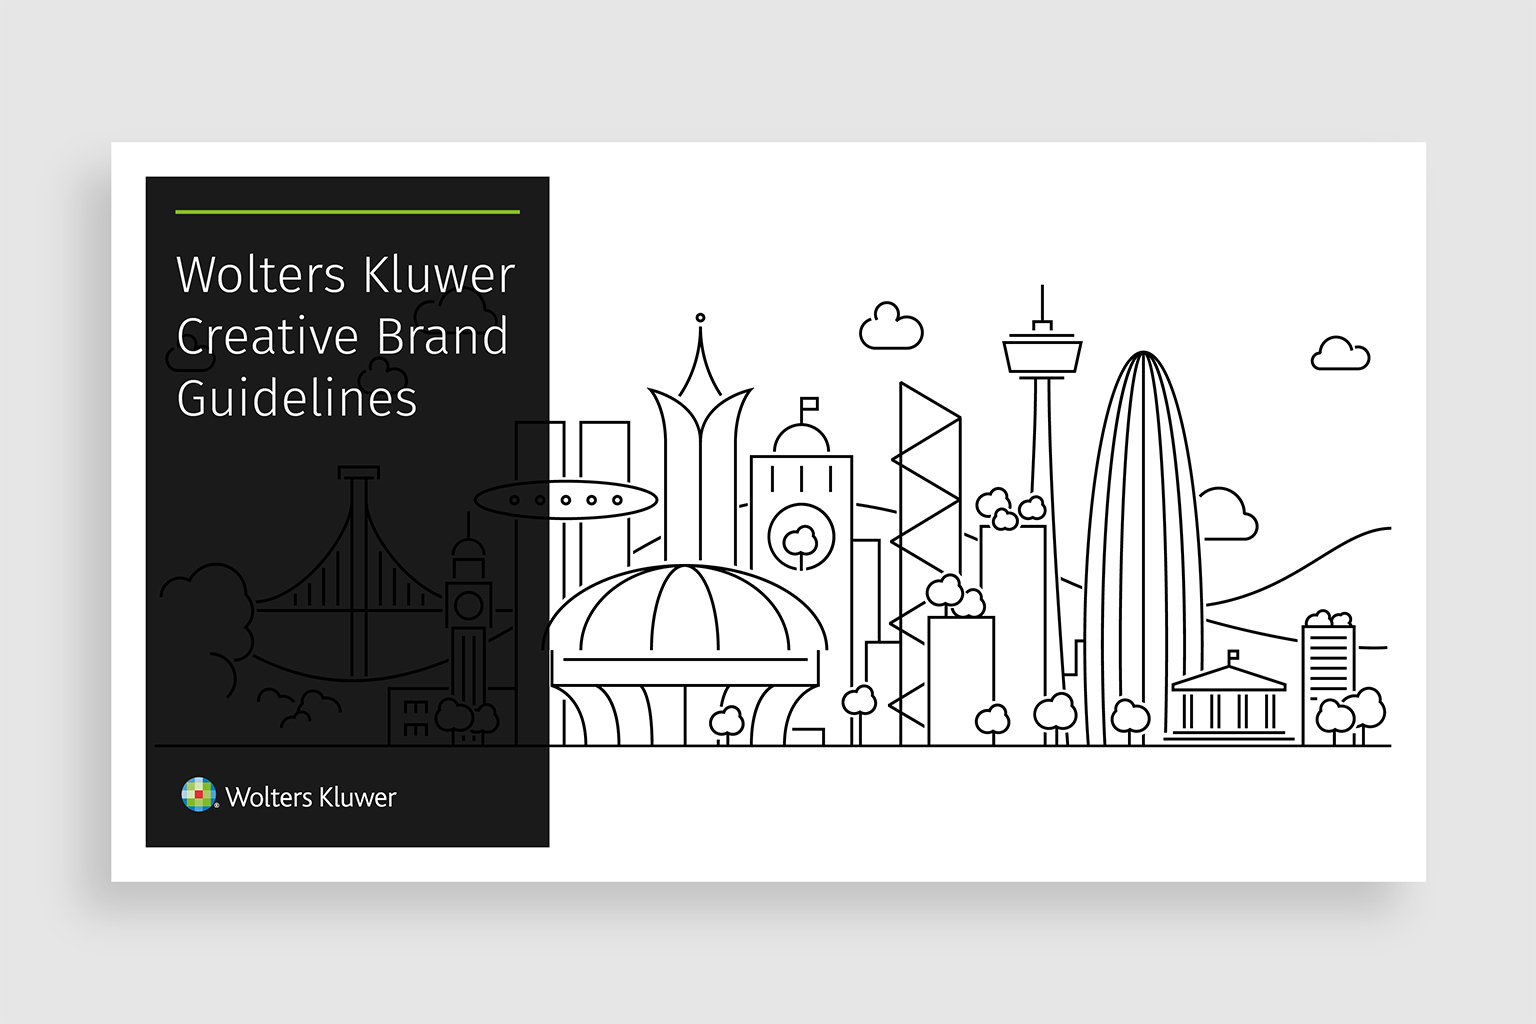 Wolters Kluwer brand creative guidelines. OnLiveSite